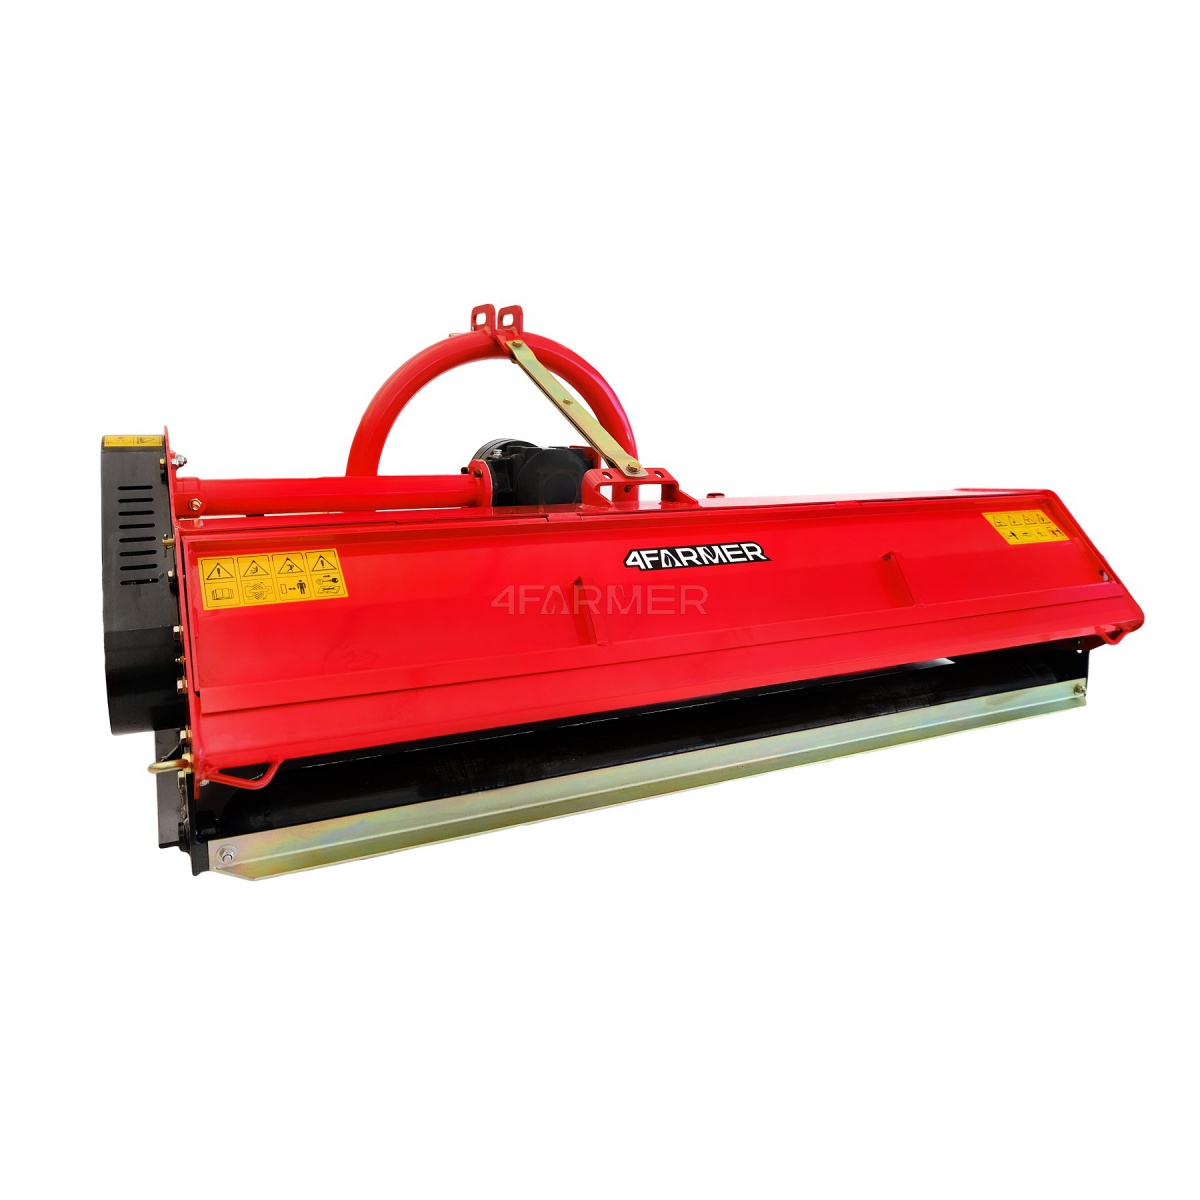 efdefdh opening outlet - Flail mower with shift EFD 180 4FARMER